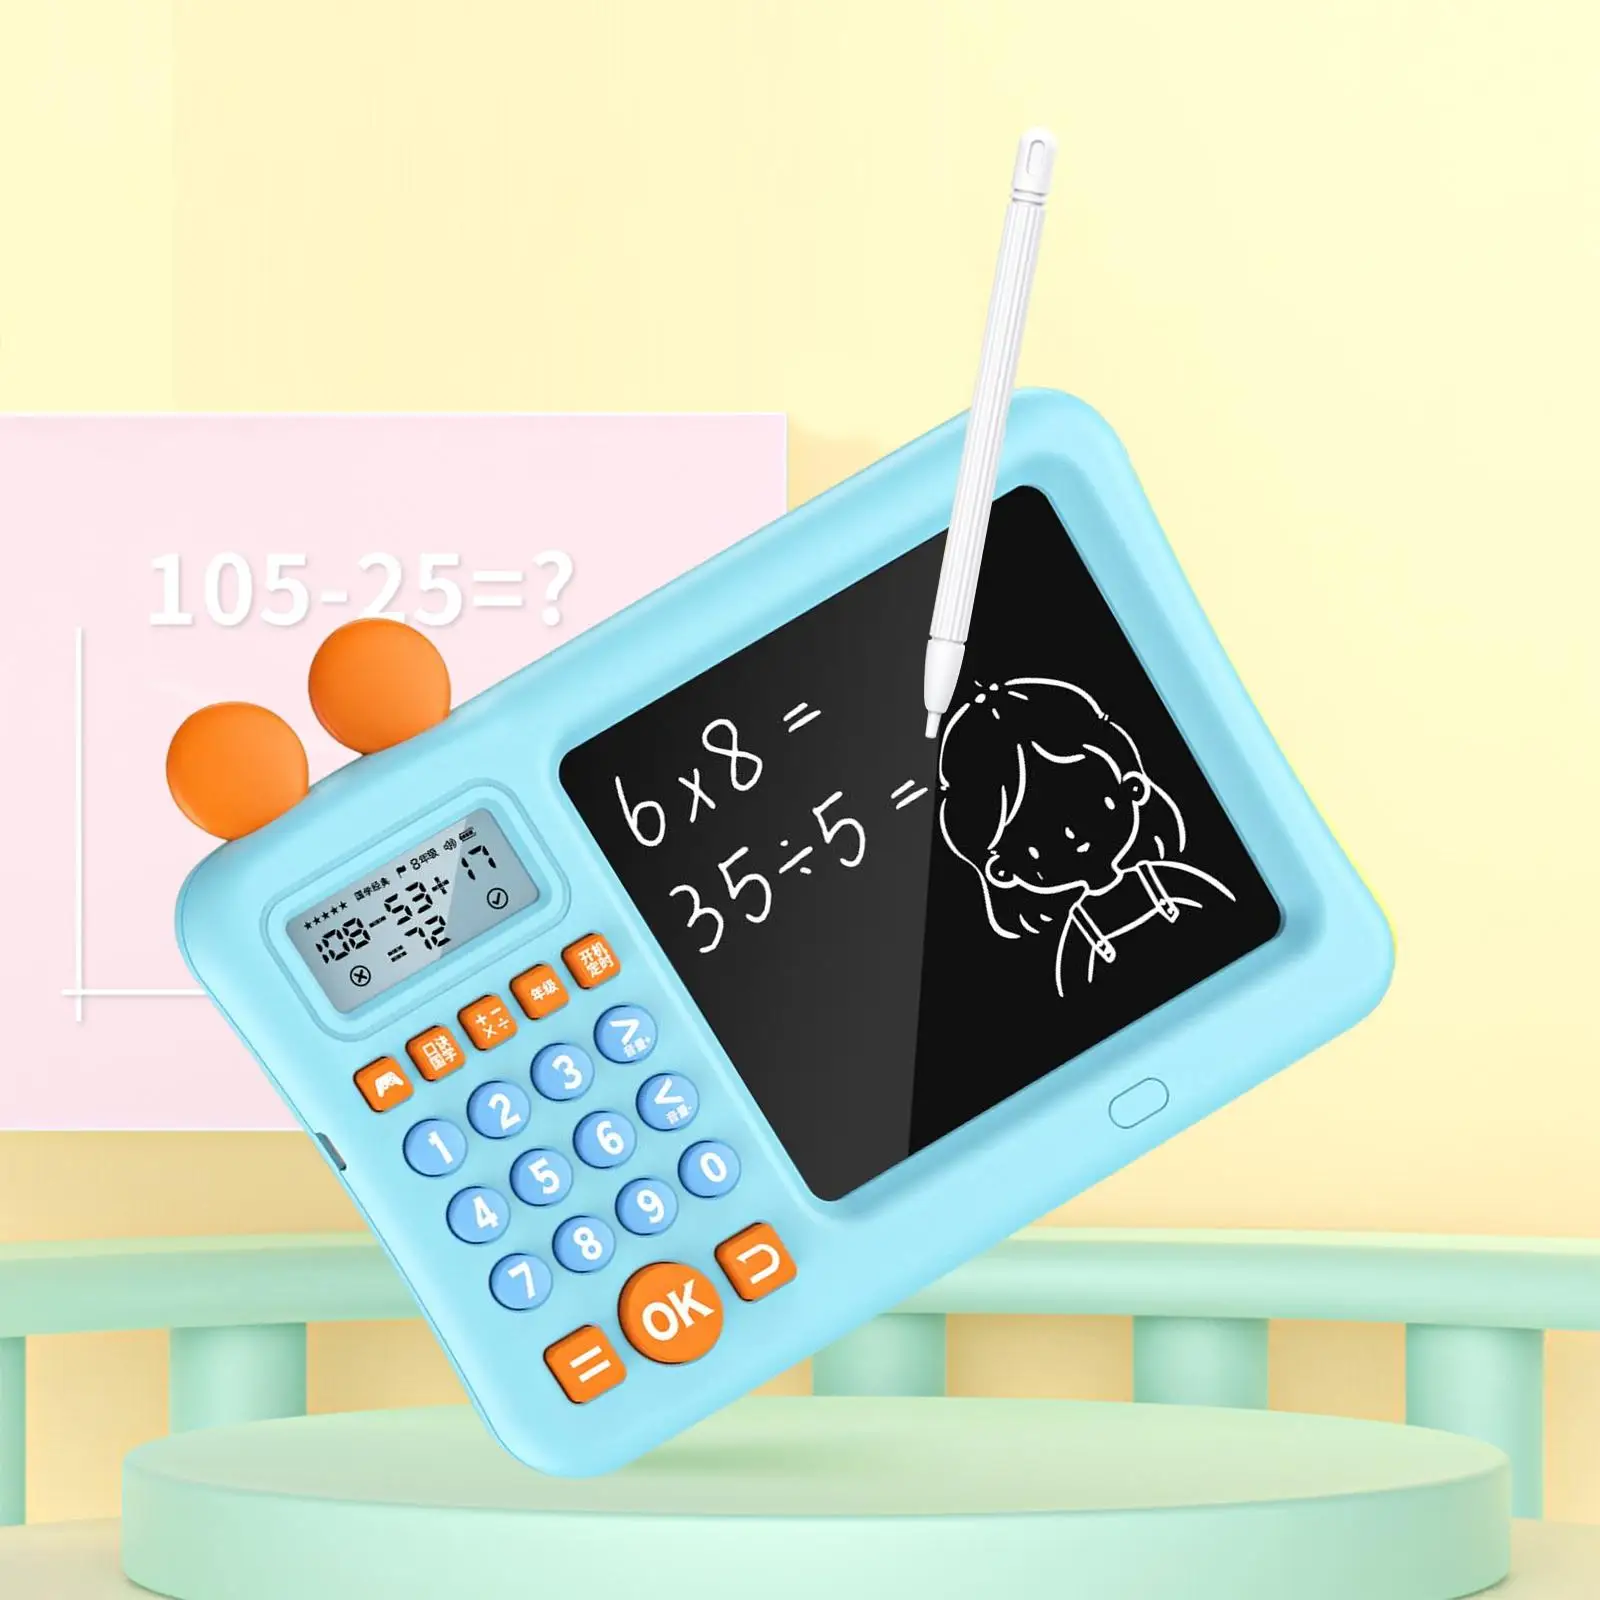 Maths Teaching Calculator Early Math Educational Toy Educational for Toddler